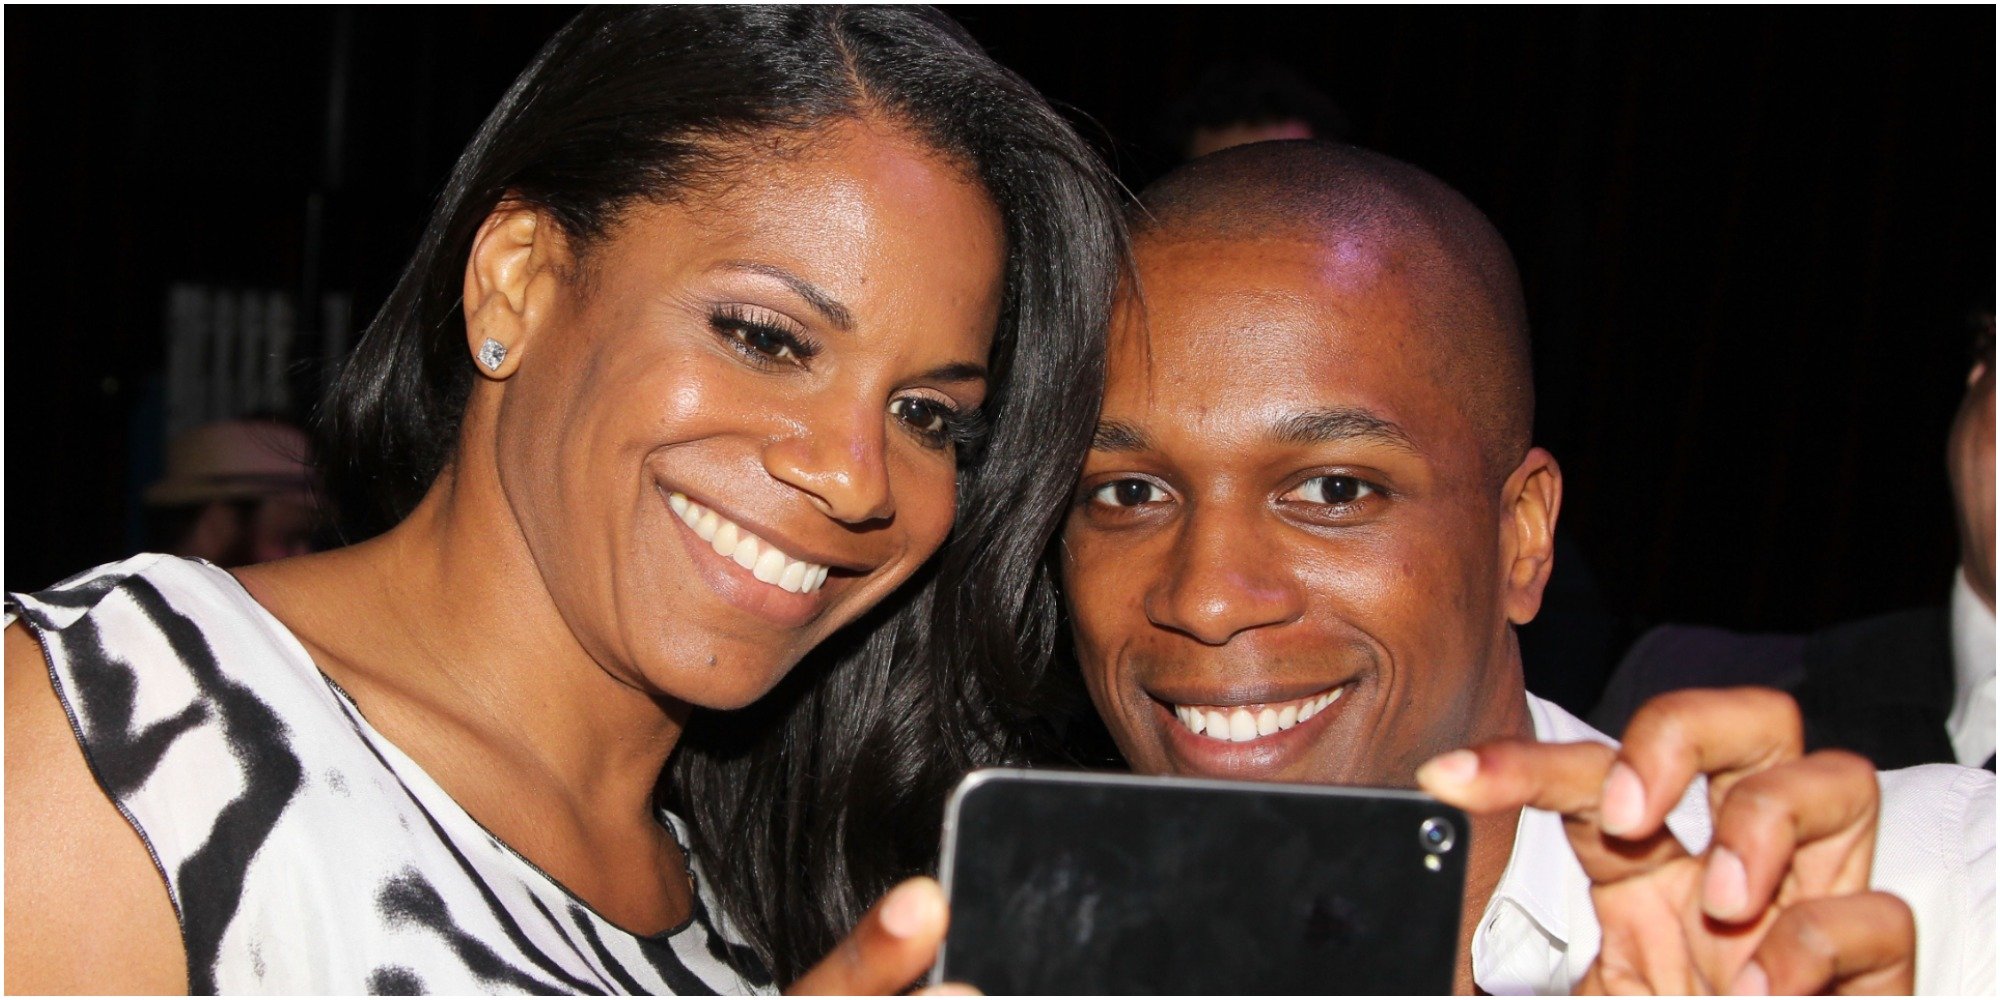 Audra McDonald and Leslie Odom Jr. will share hosting duties for the Tony Awards.